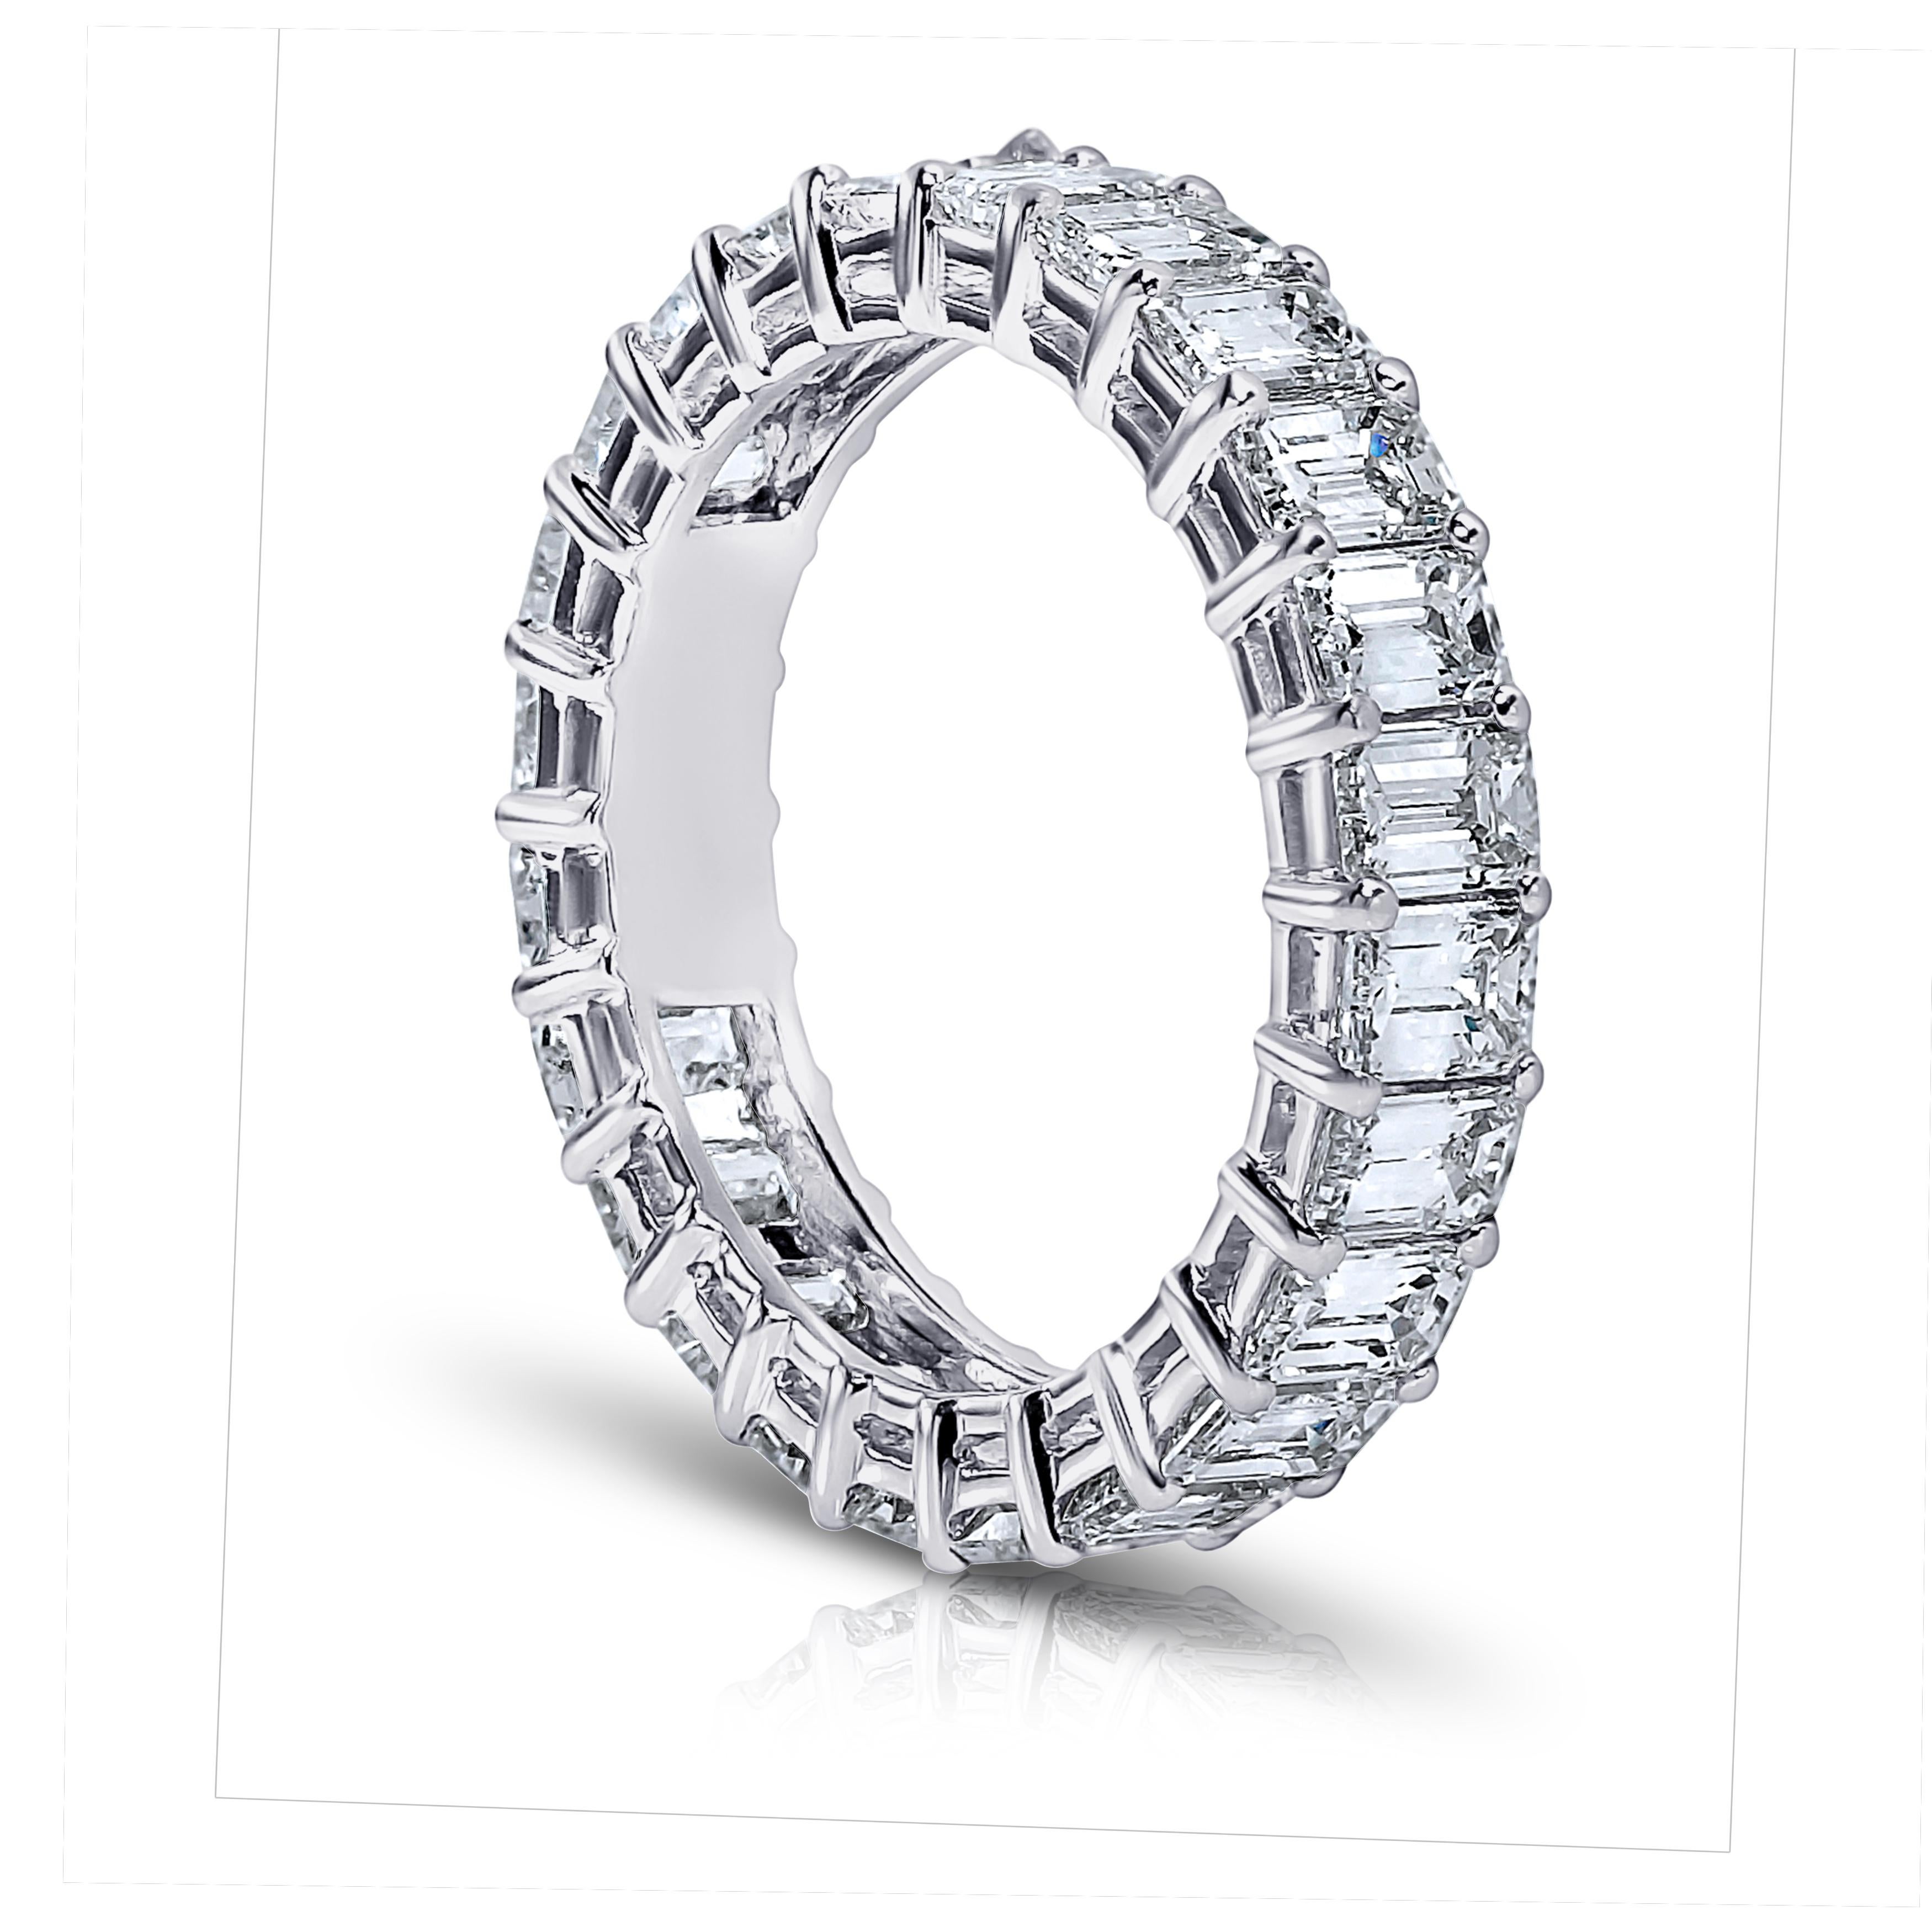 Emerald Cut diamond ring platinum eternity band shared prong style with a gallery.
25 perfectly matched diamonds weighing a minimum of 4.00 cts.Finger size 7
European Size 54. British Size N1/2.
 Ranging from G-H in color . VVS1-VS2 in clarity .
Lab